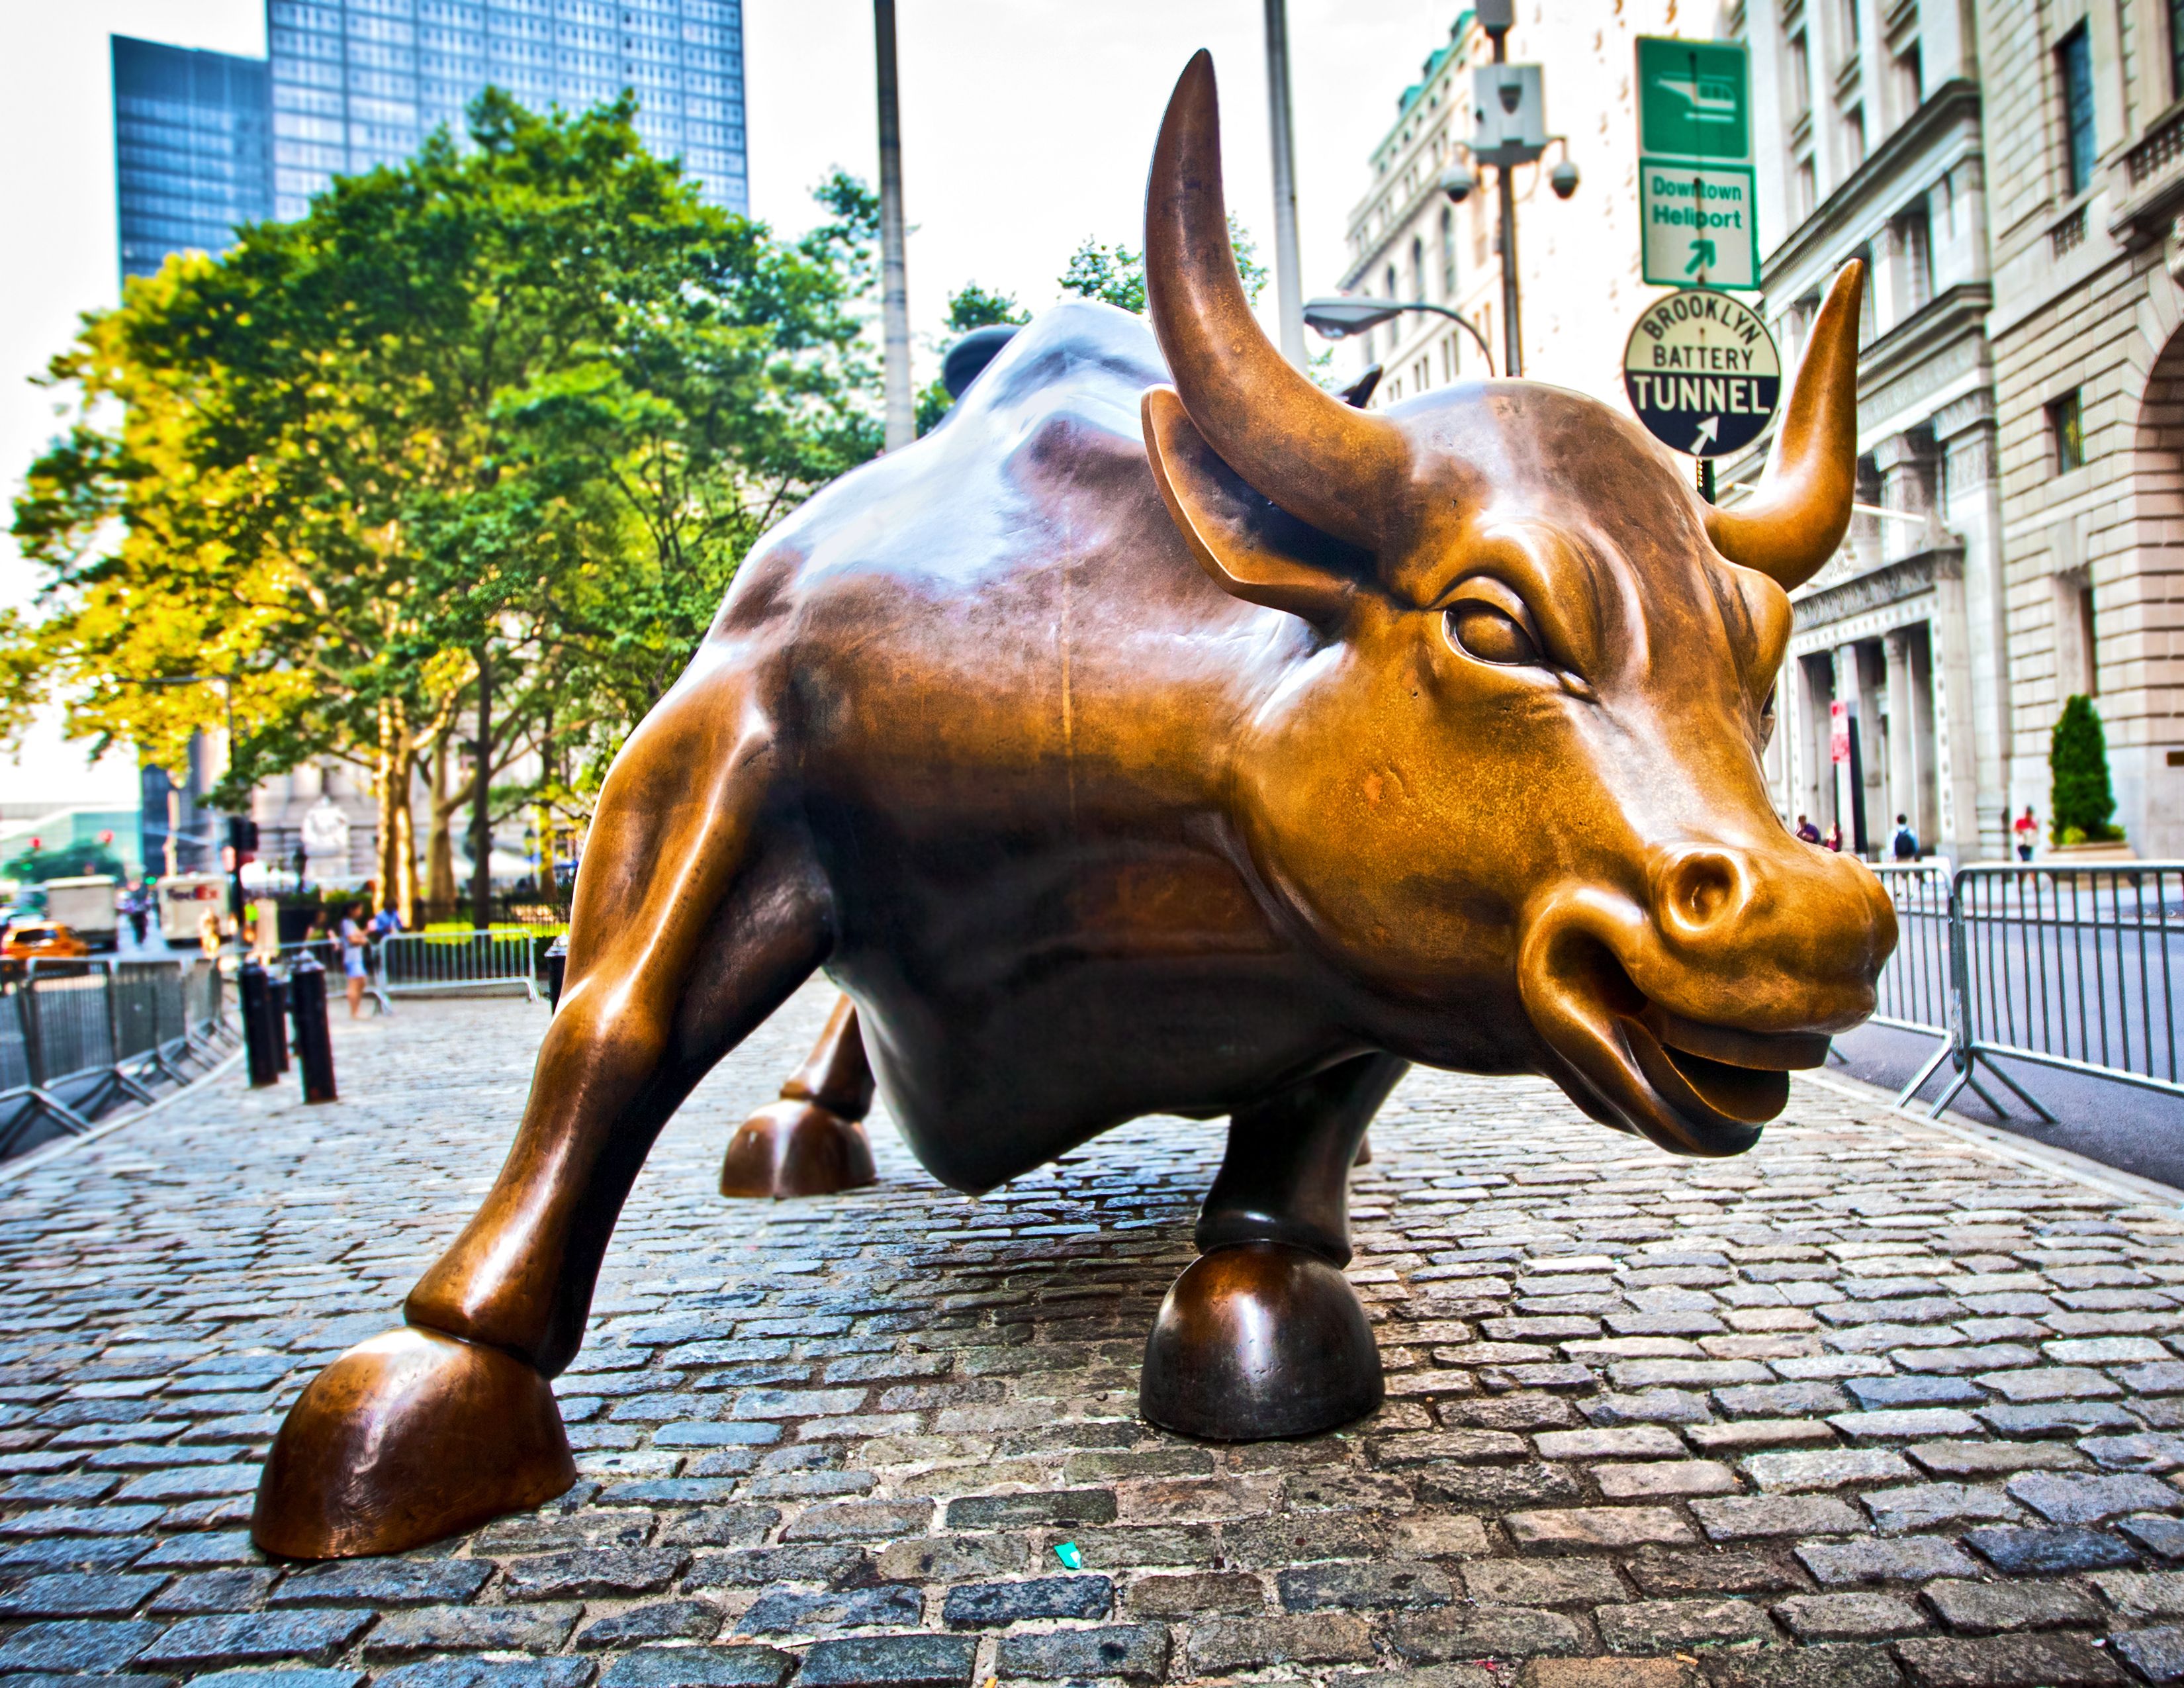 The landmark Charging Bull in Lower Manhattan represents aggressive financial optimism and prosperity Aug. 3, 2012 in New York, NY.